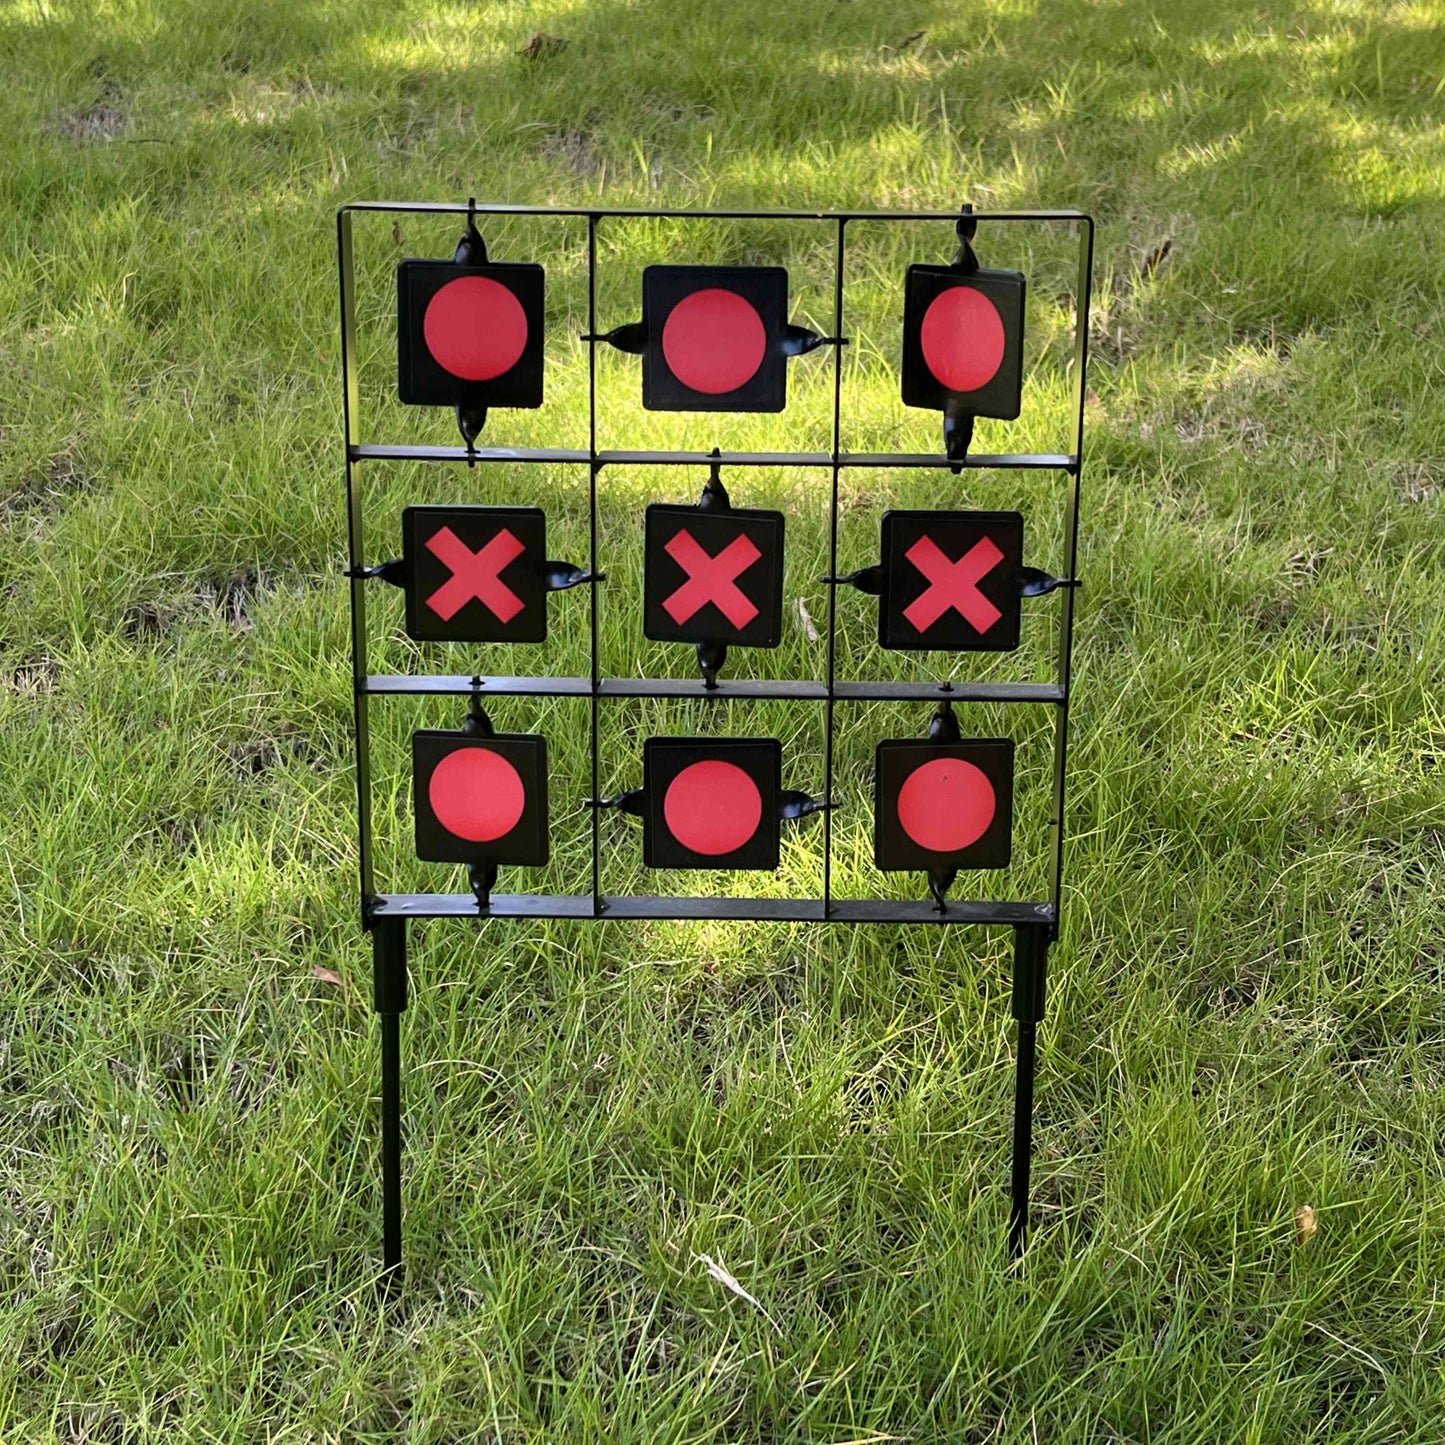 Atflbox Spinning Airsoft Target, Two Styles of Sticker Resetting Target for BB Gun Pellet